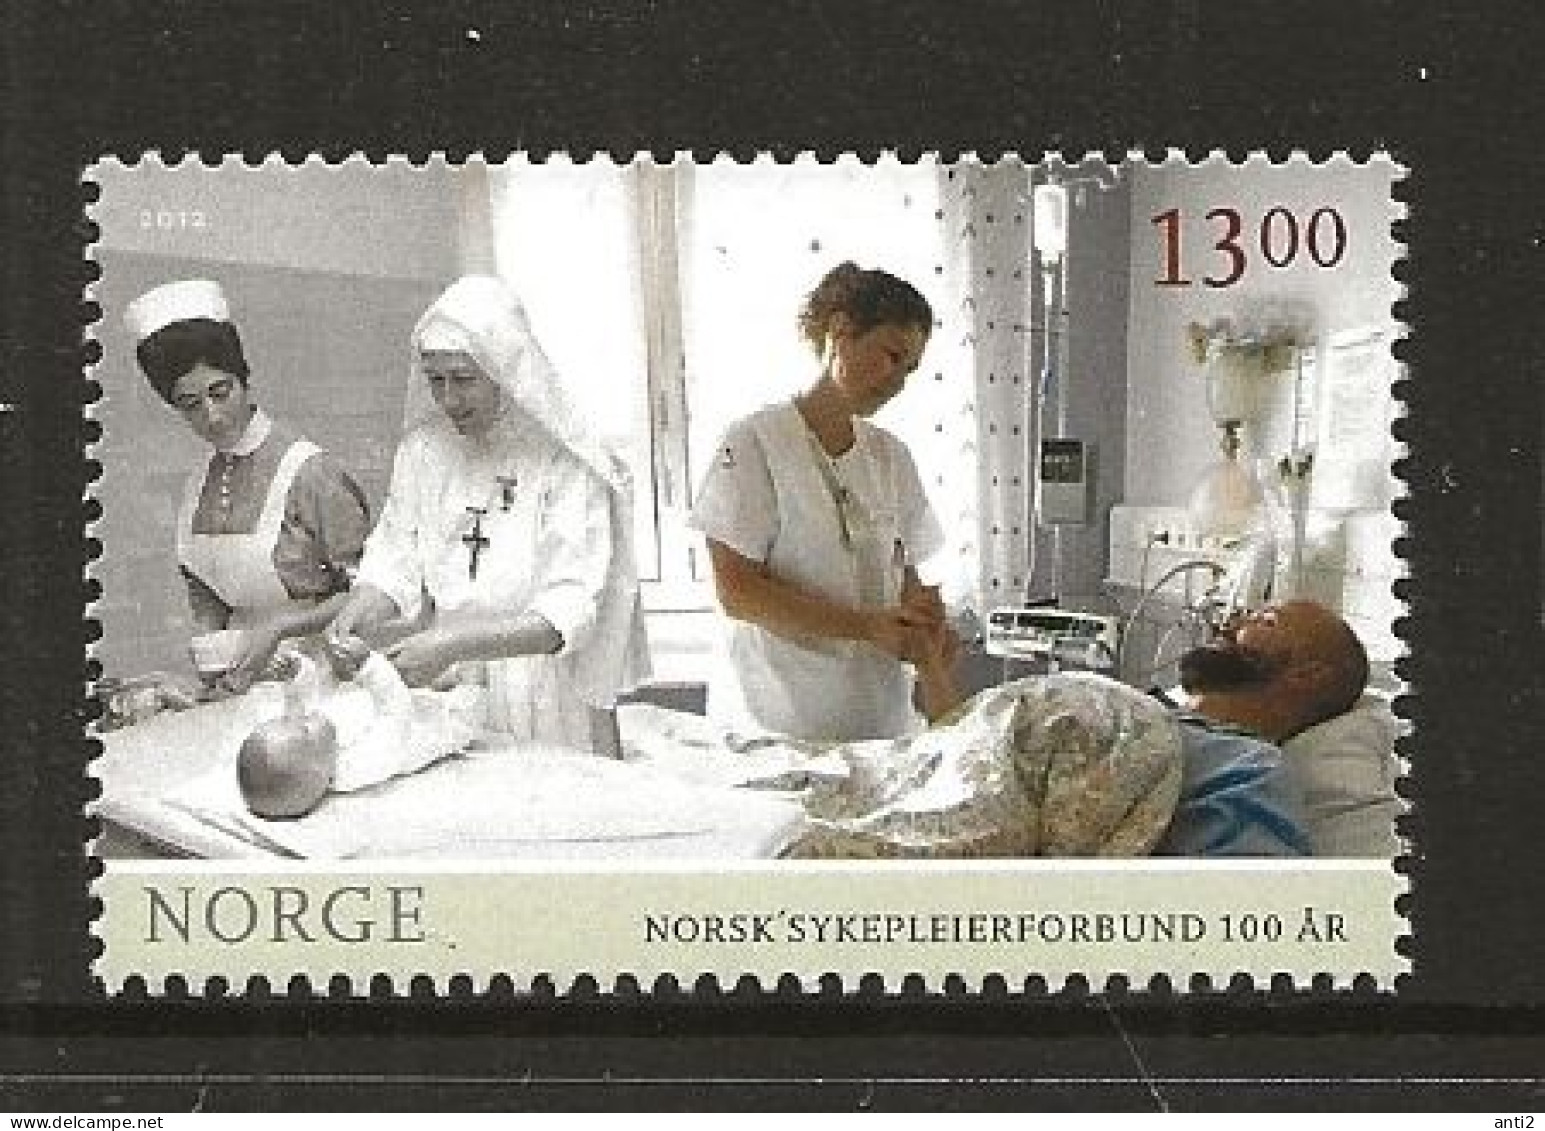 Norway Norge 2012 Centenary Of The Professional Association For Nursing Profession, Mi 1795  MNH(**) - Neufs